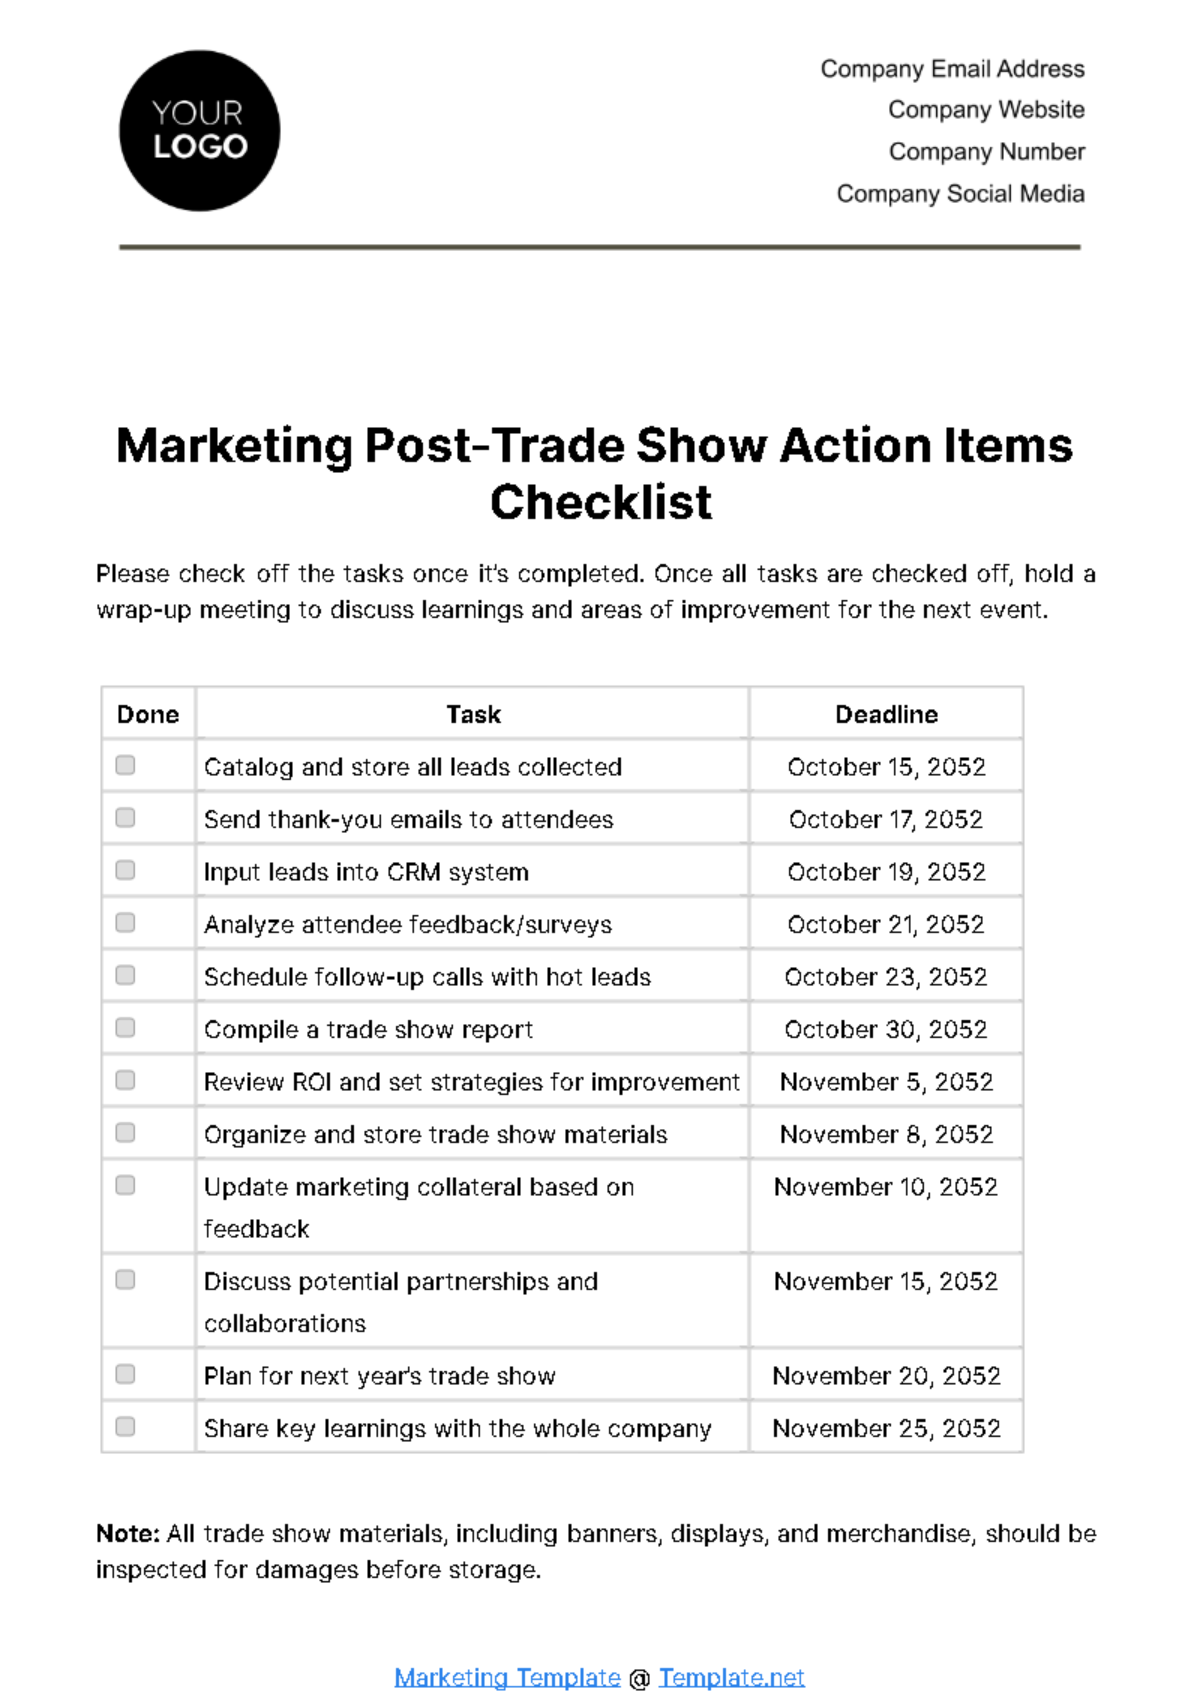 Marketing Post-Trade Show Action Items Checklist Template